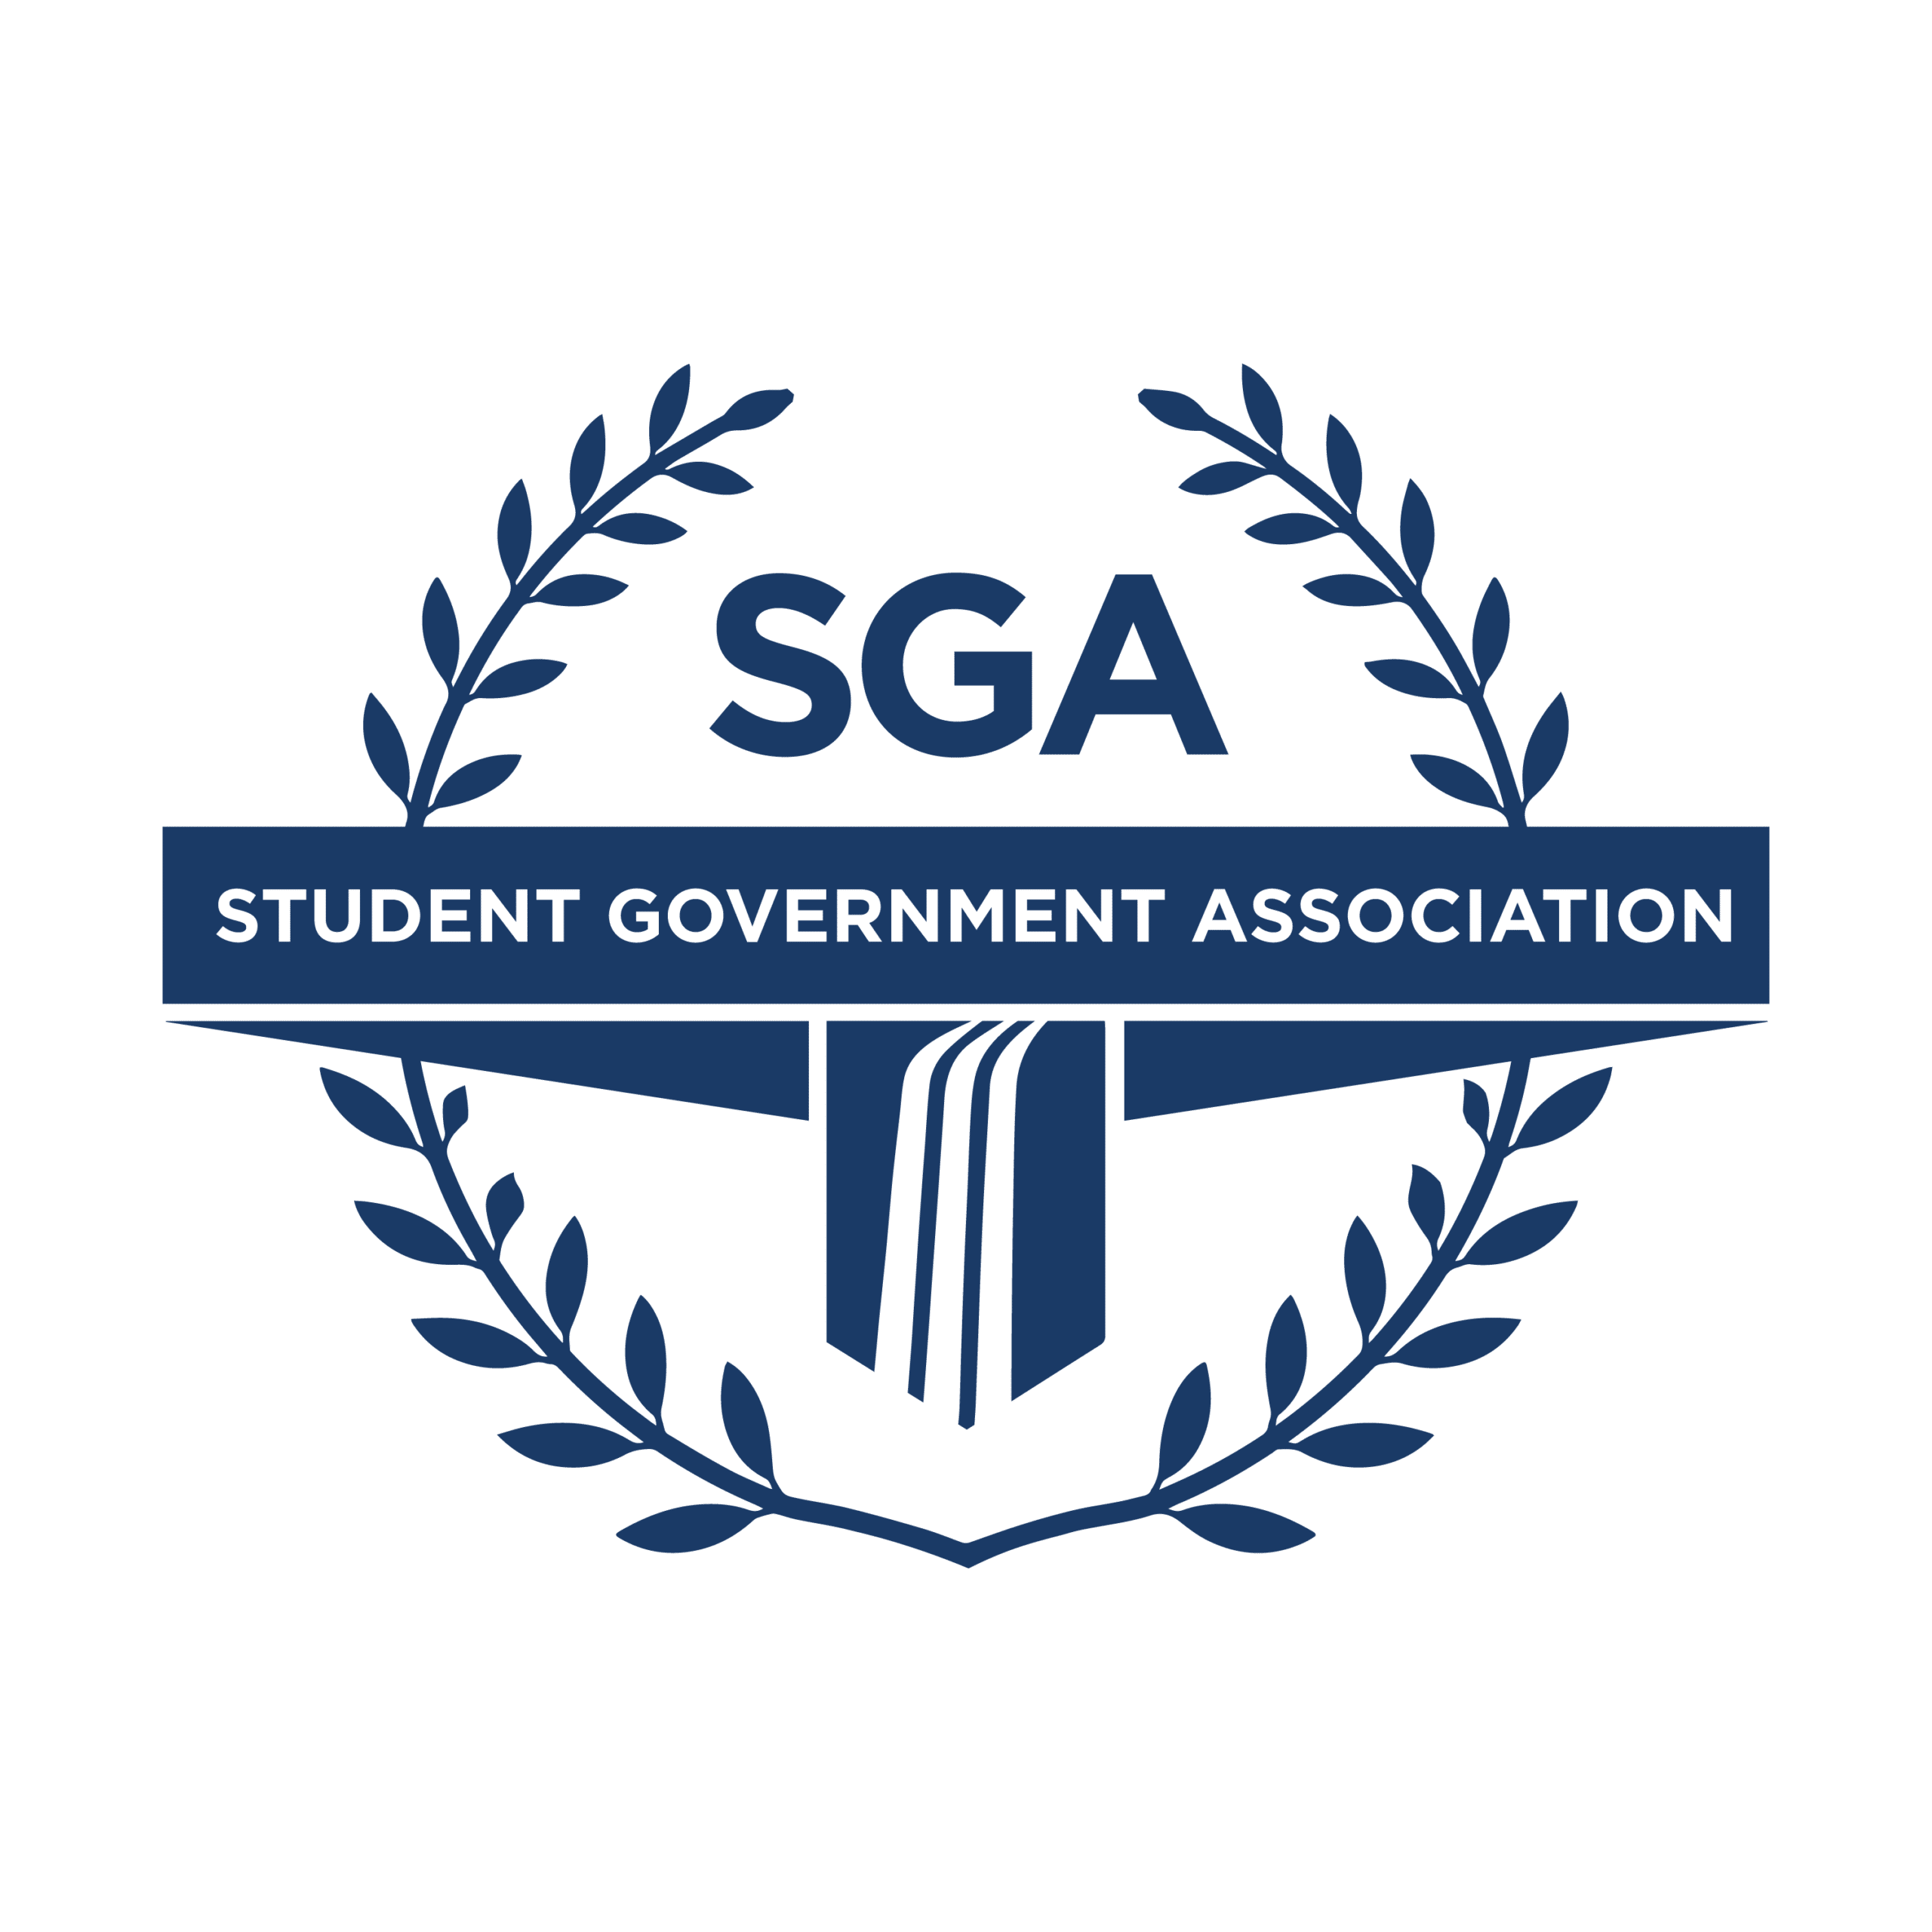  the logo for student government with two leaves on the sides